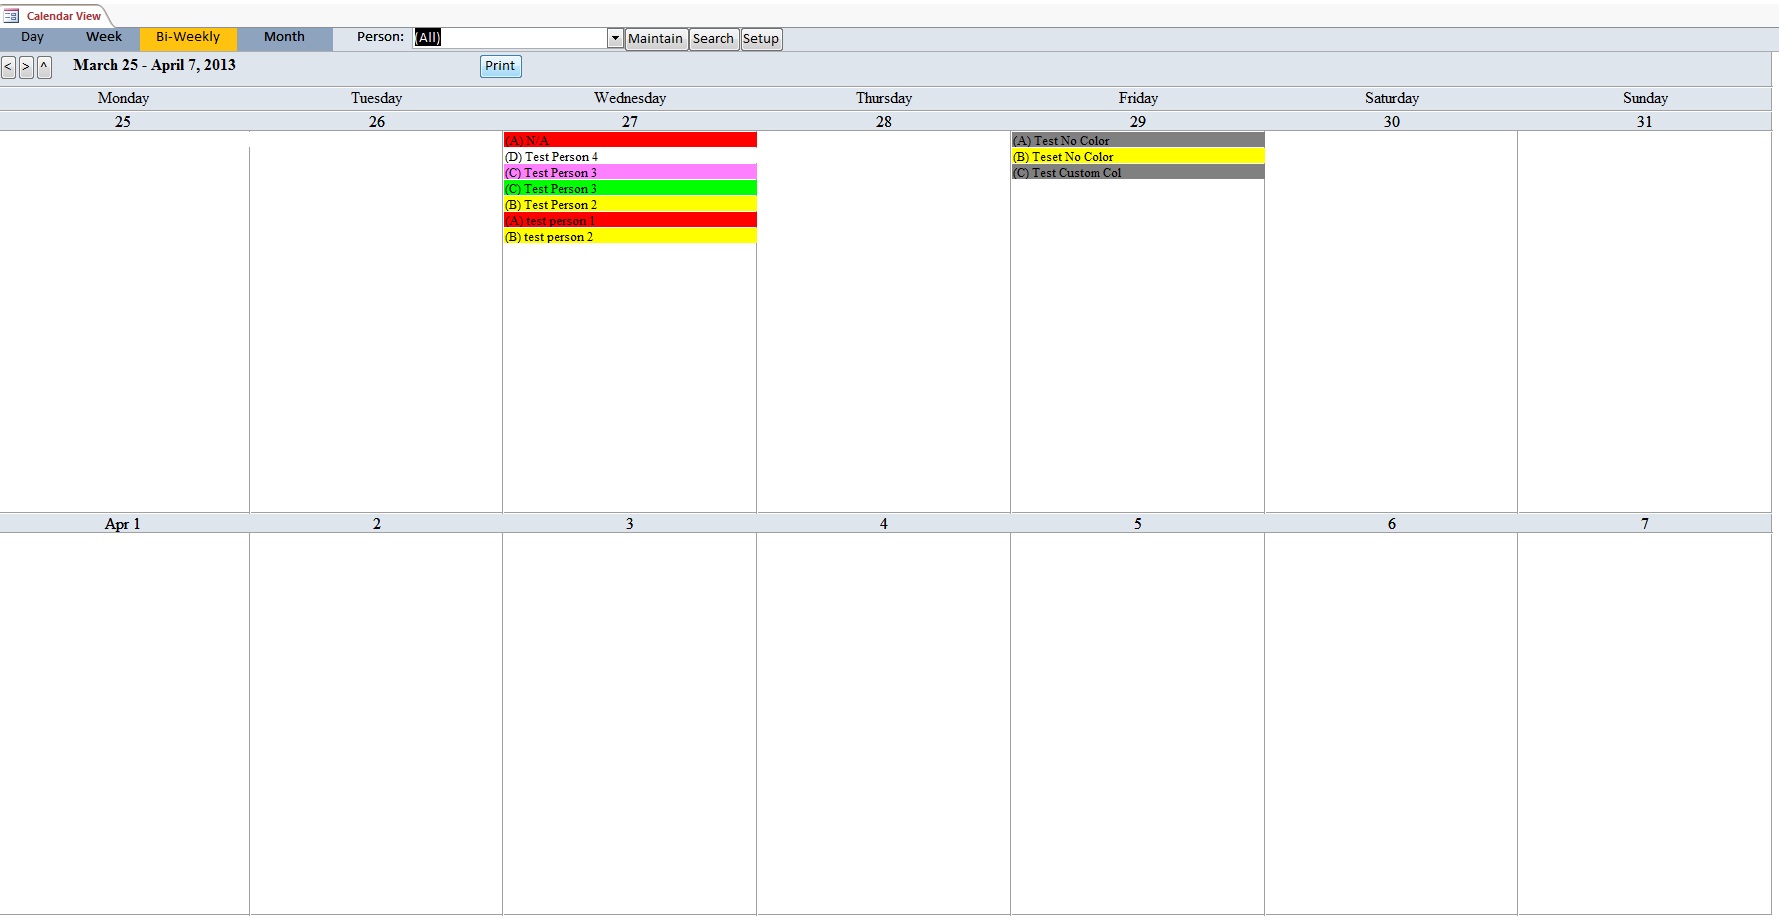 Dentist Appointment Tracking Template Outlook Style | Tracking Database